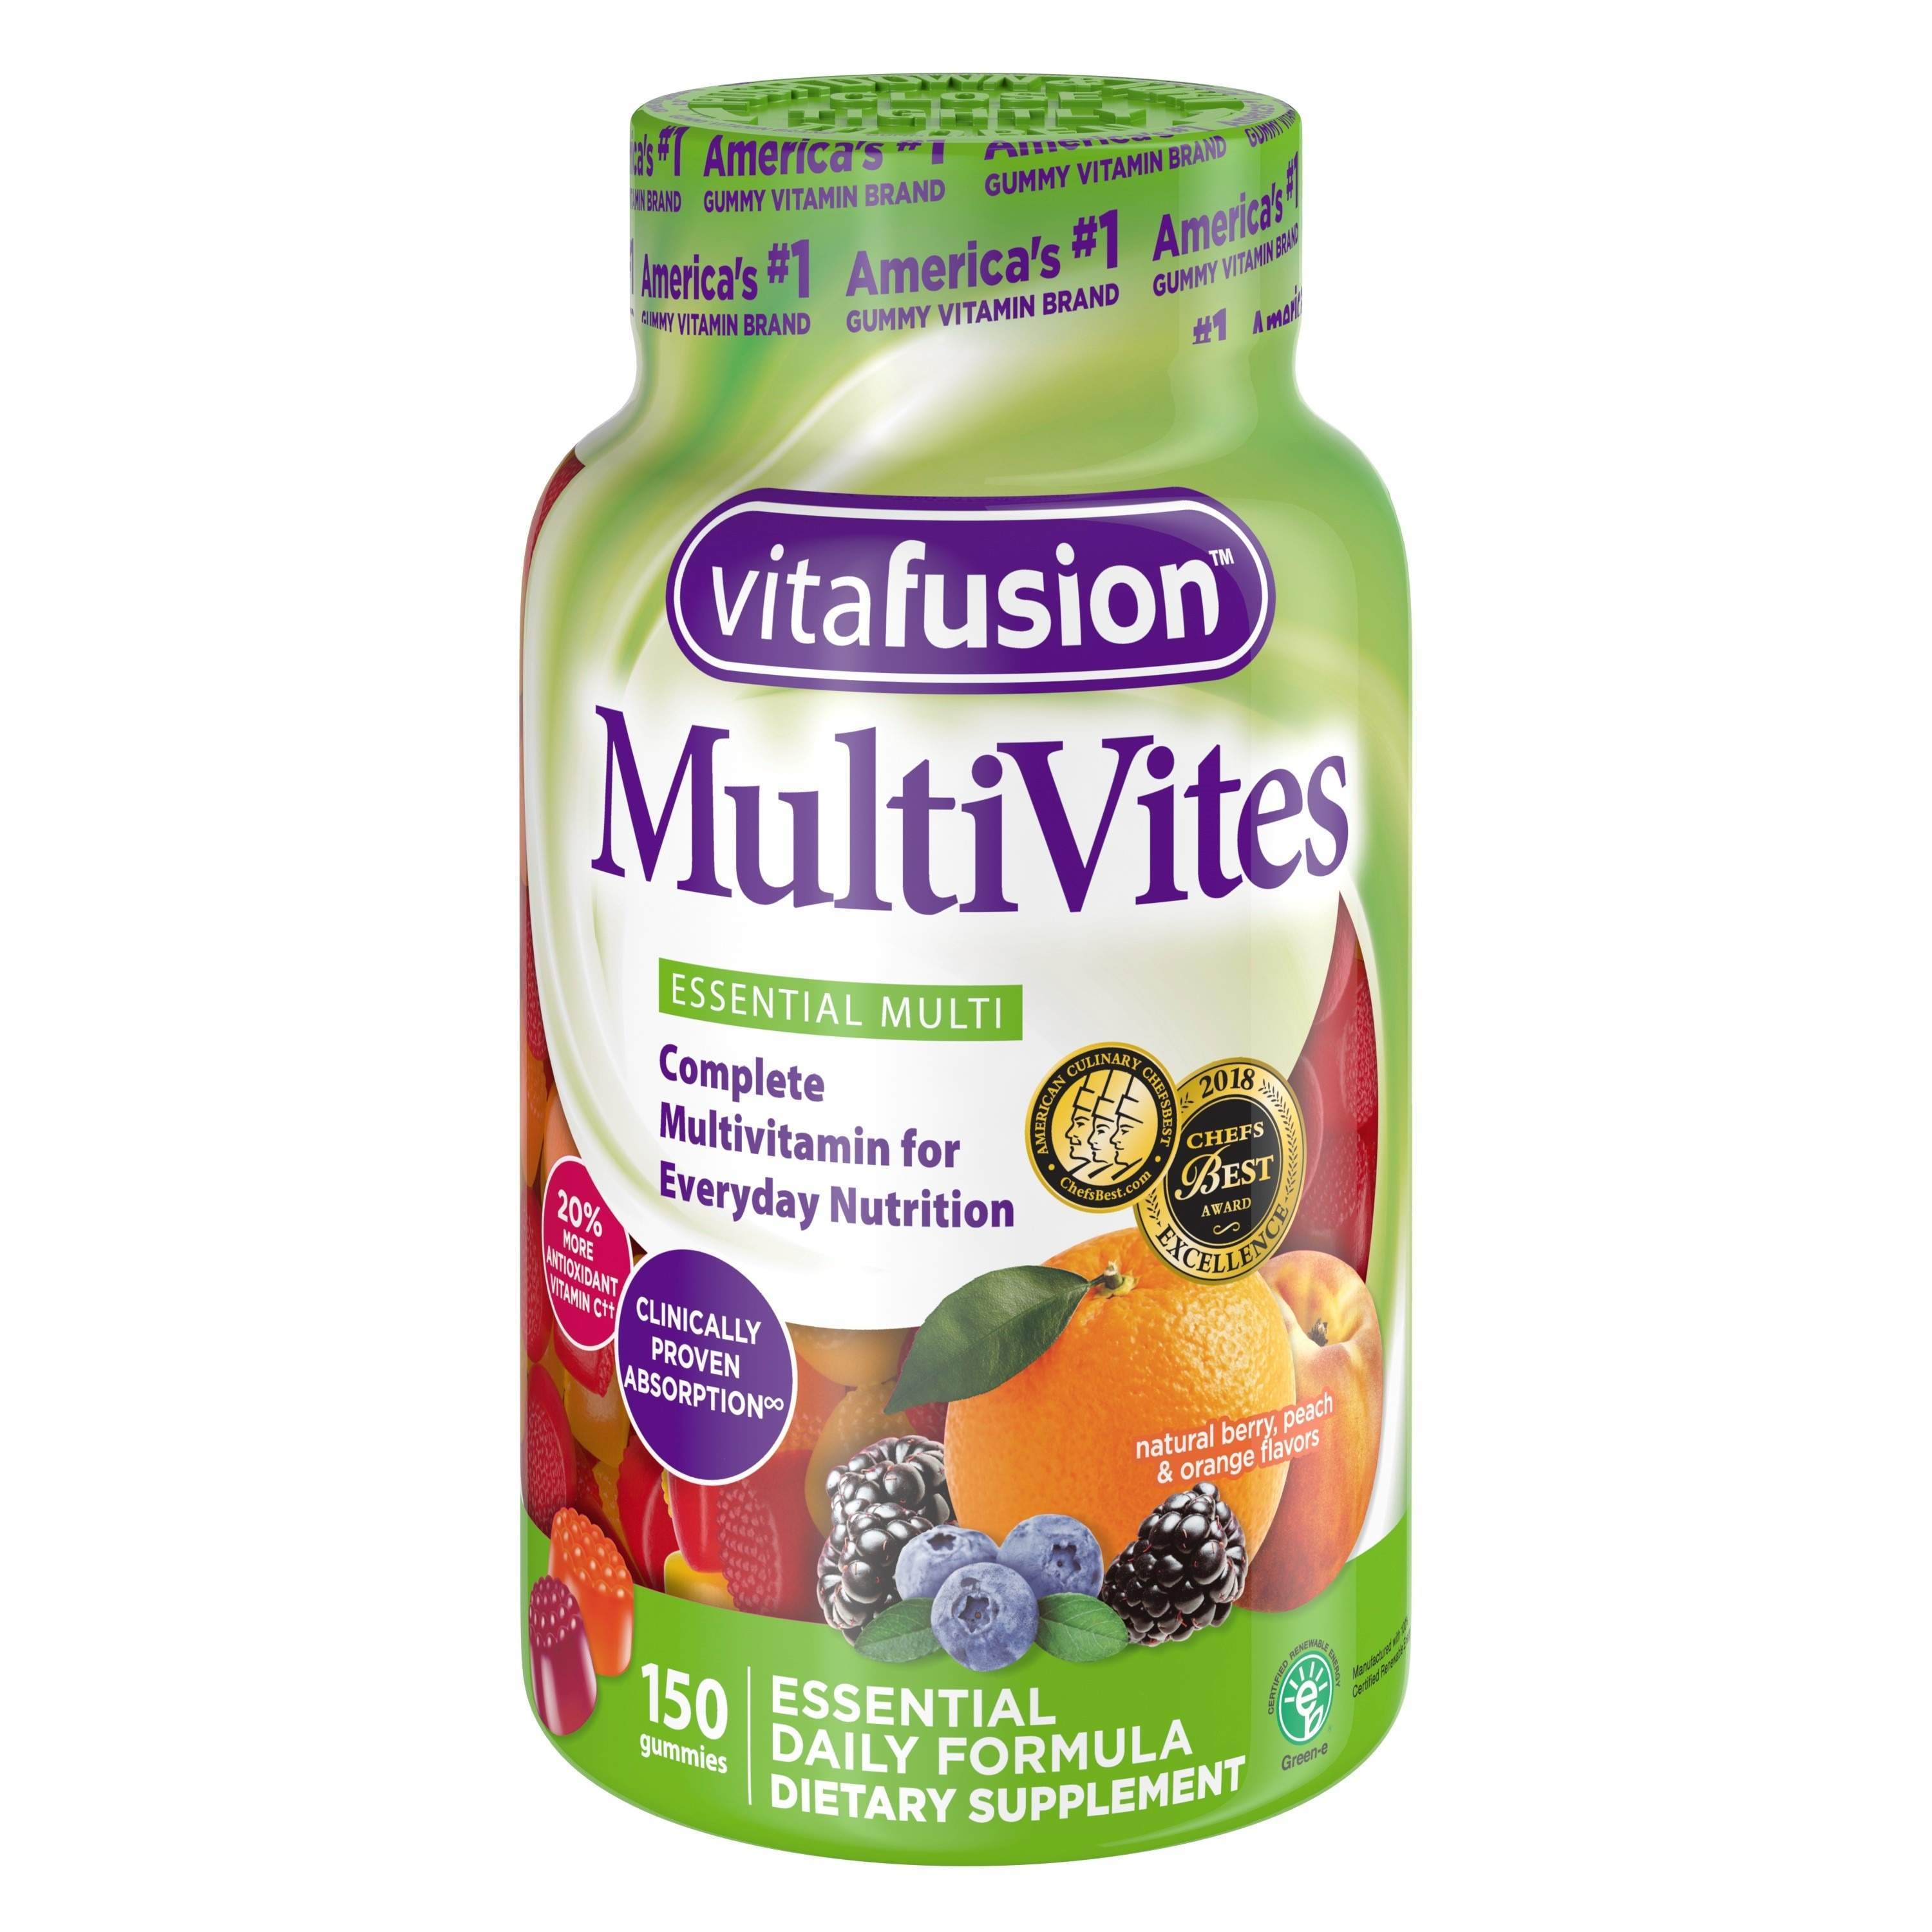 Church & Dwight to use recycle-friendly shrink packaging for vitafusion vitamin brand